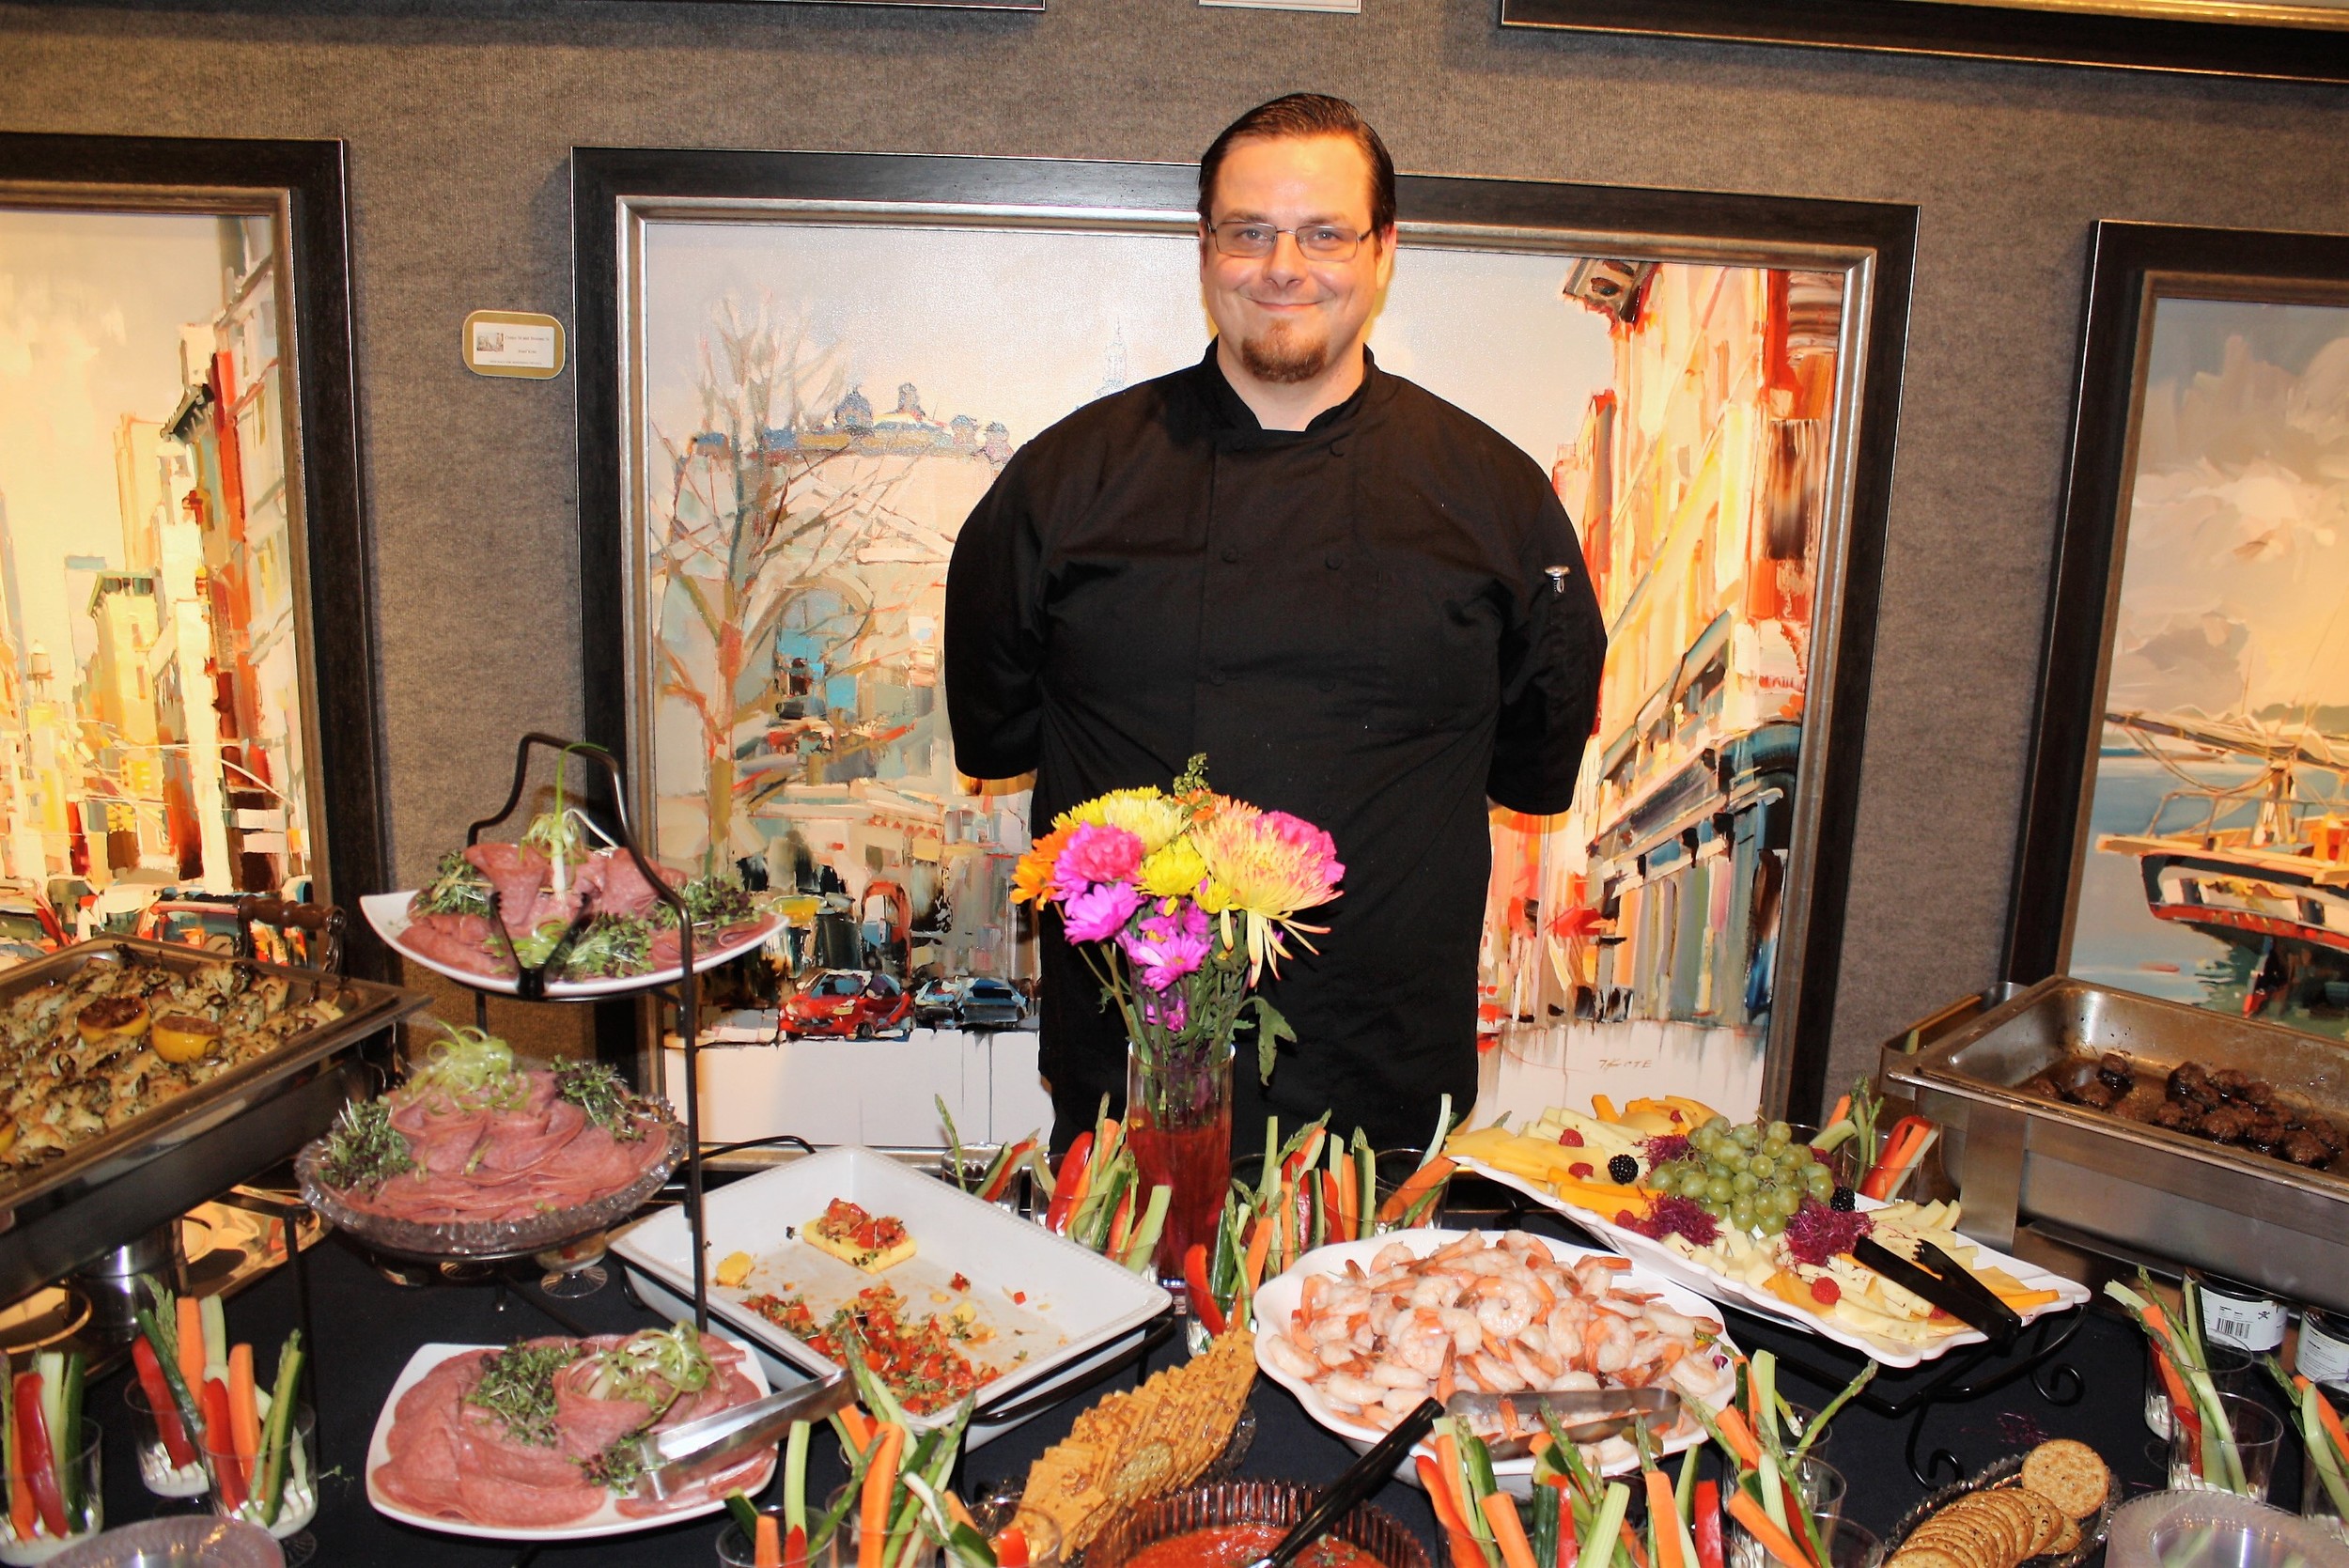 Chef Tommy McDonough of Ponte Vedra Beach’s Flavor Palette provided the food for the Chamber of Commerce holiday gathering.